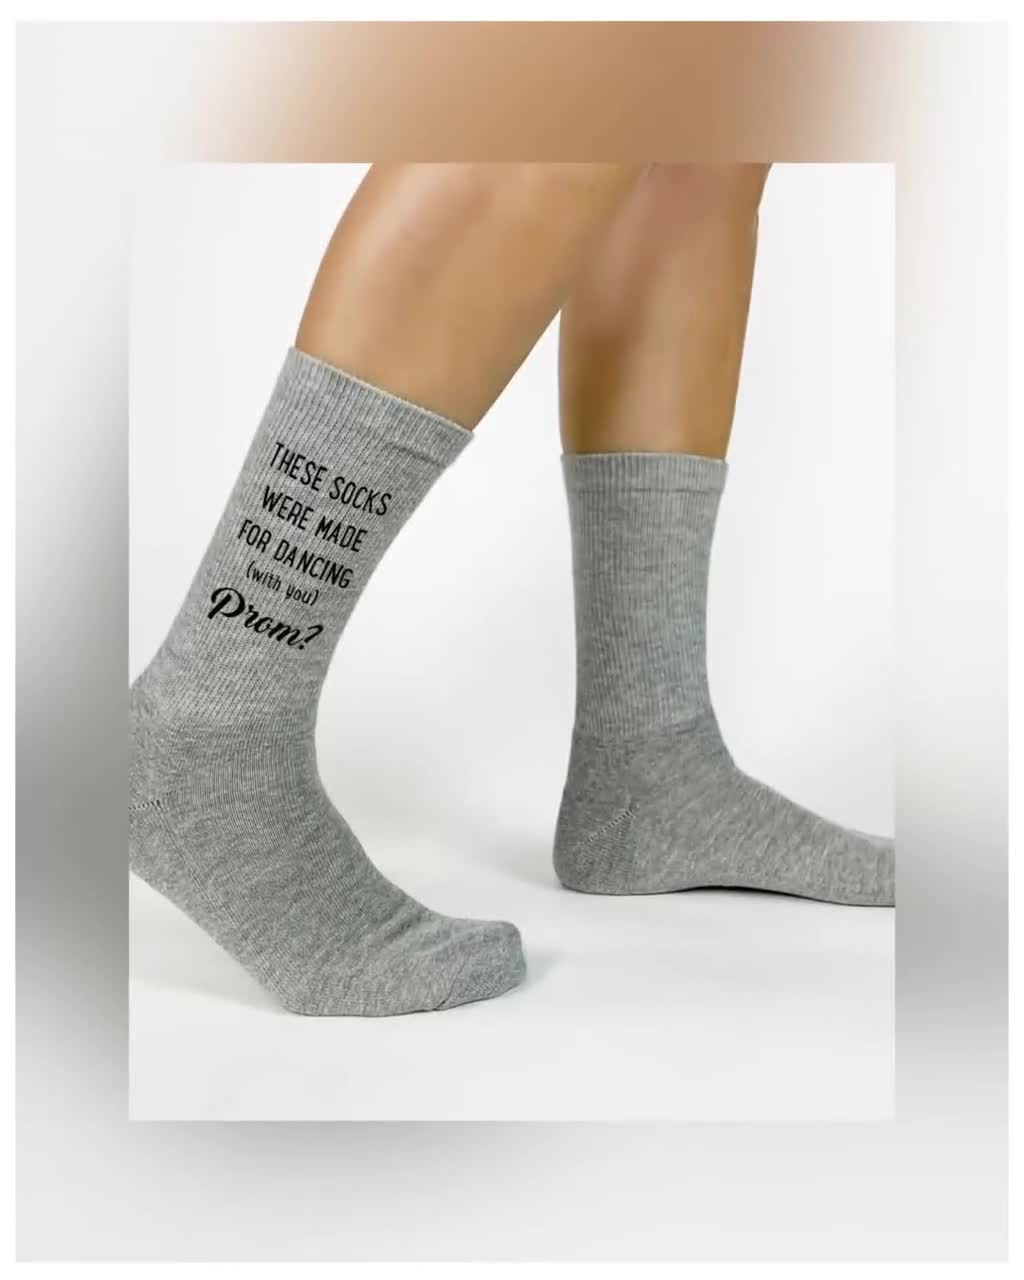 Fun Promposal Socks, Socks Made for Dancing With Your Prom Date, Cotton Crew  2023 Promposal Socks for Him and Her 